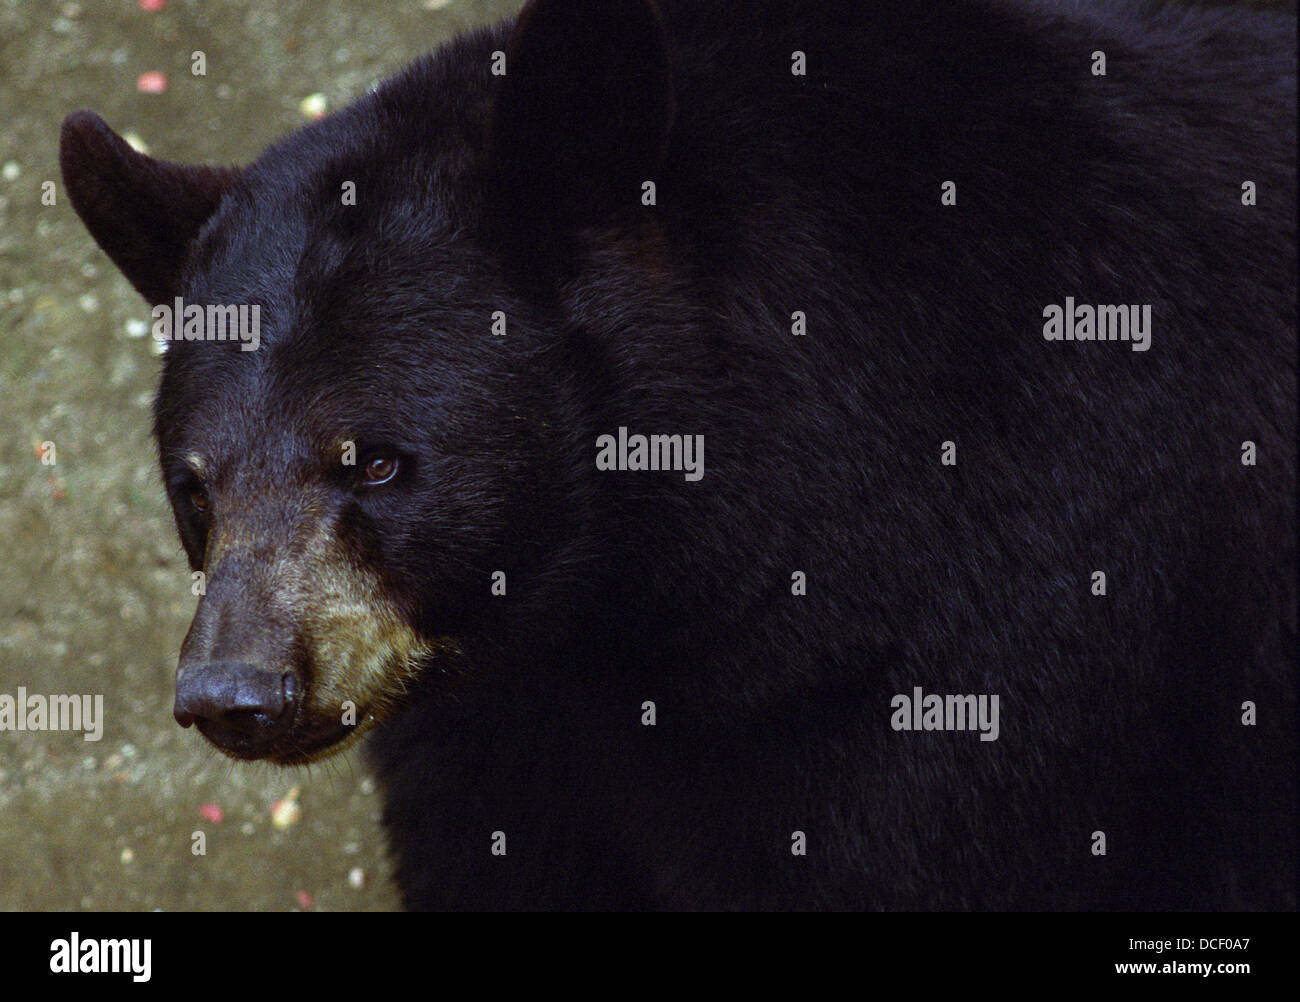 A close-up of the face and upper body of a Black Bear in 3/4 view looking directly at the camera. Stock Photo